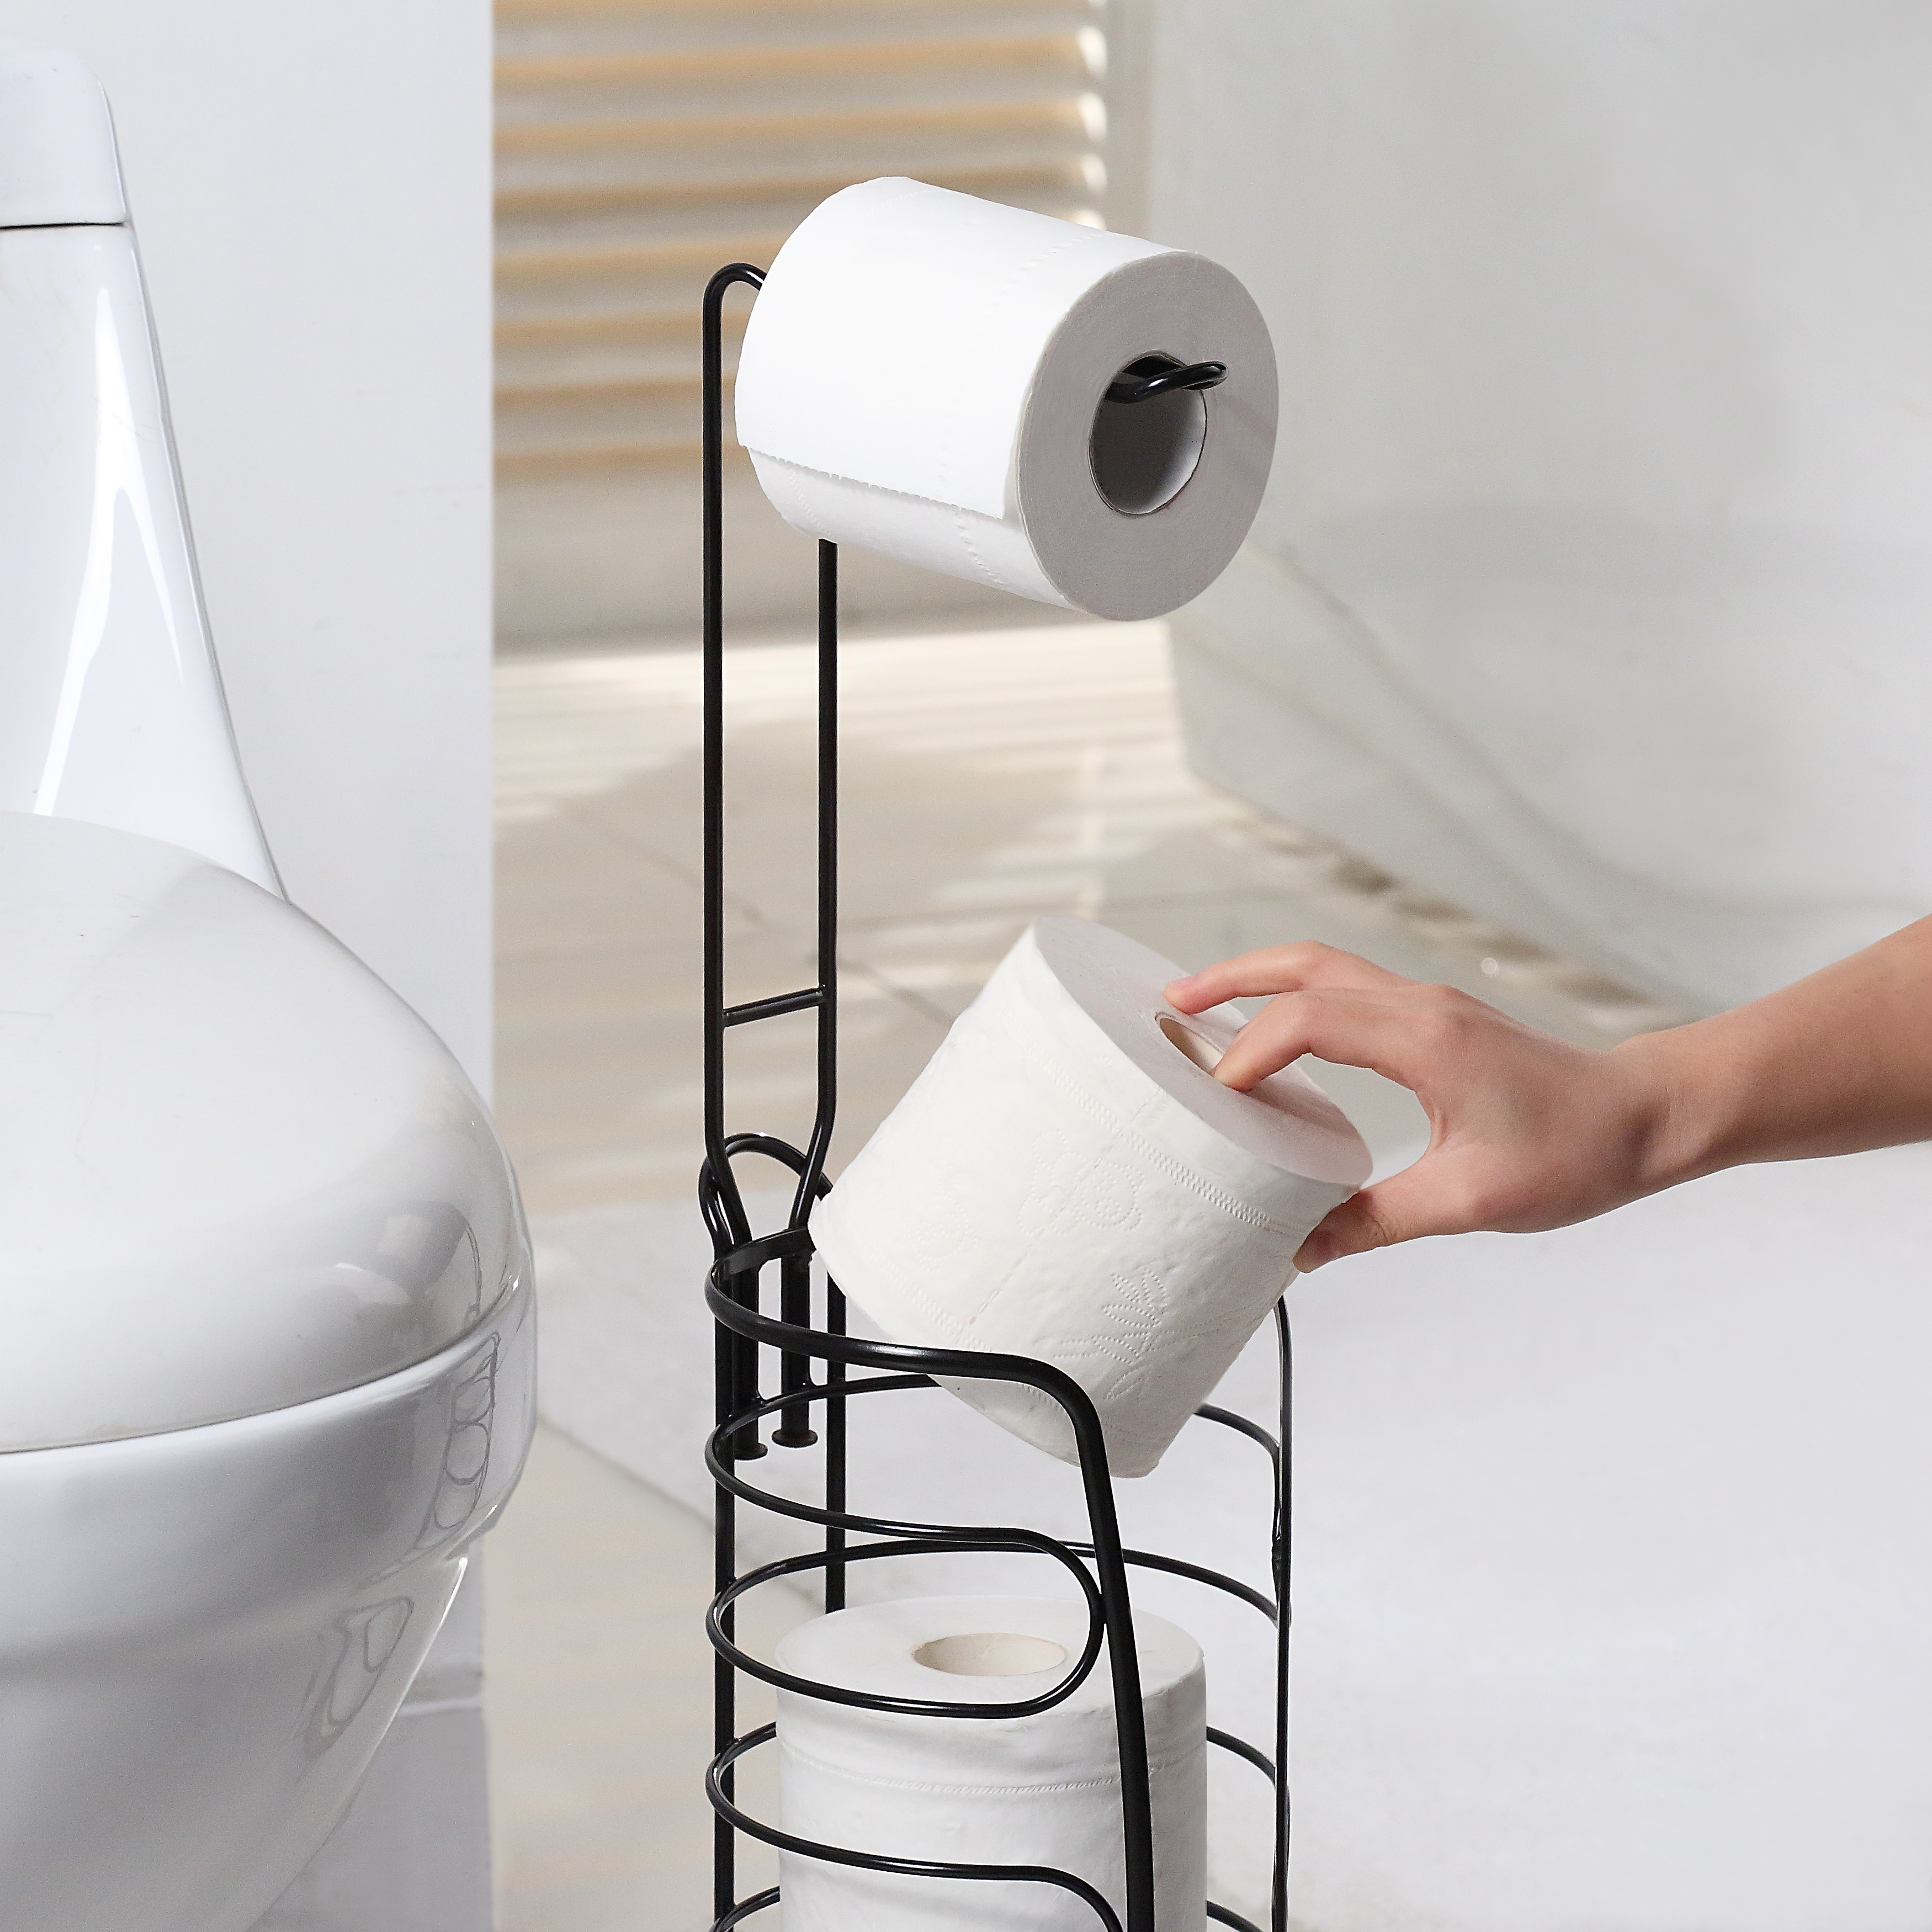 https://ak1.ostkcdn.com/images/products/is/images/direct/9f3b70e18f97f258072342ee2dbfc13b9efbc861/SunnyPoint-Freestanding-3-roll-Storage-Toilet-Paper-Holder.jpg